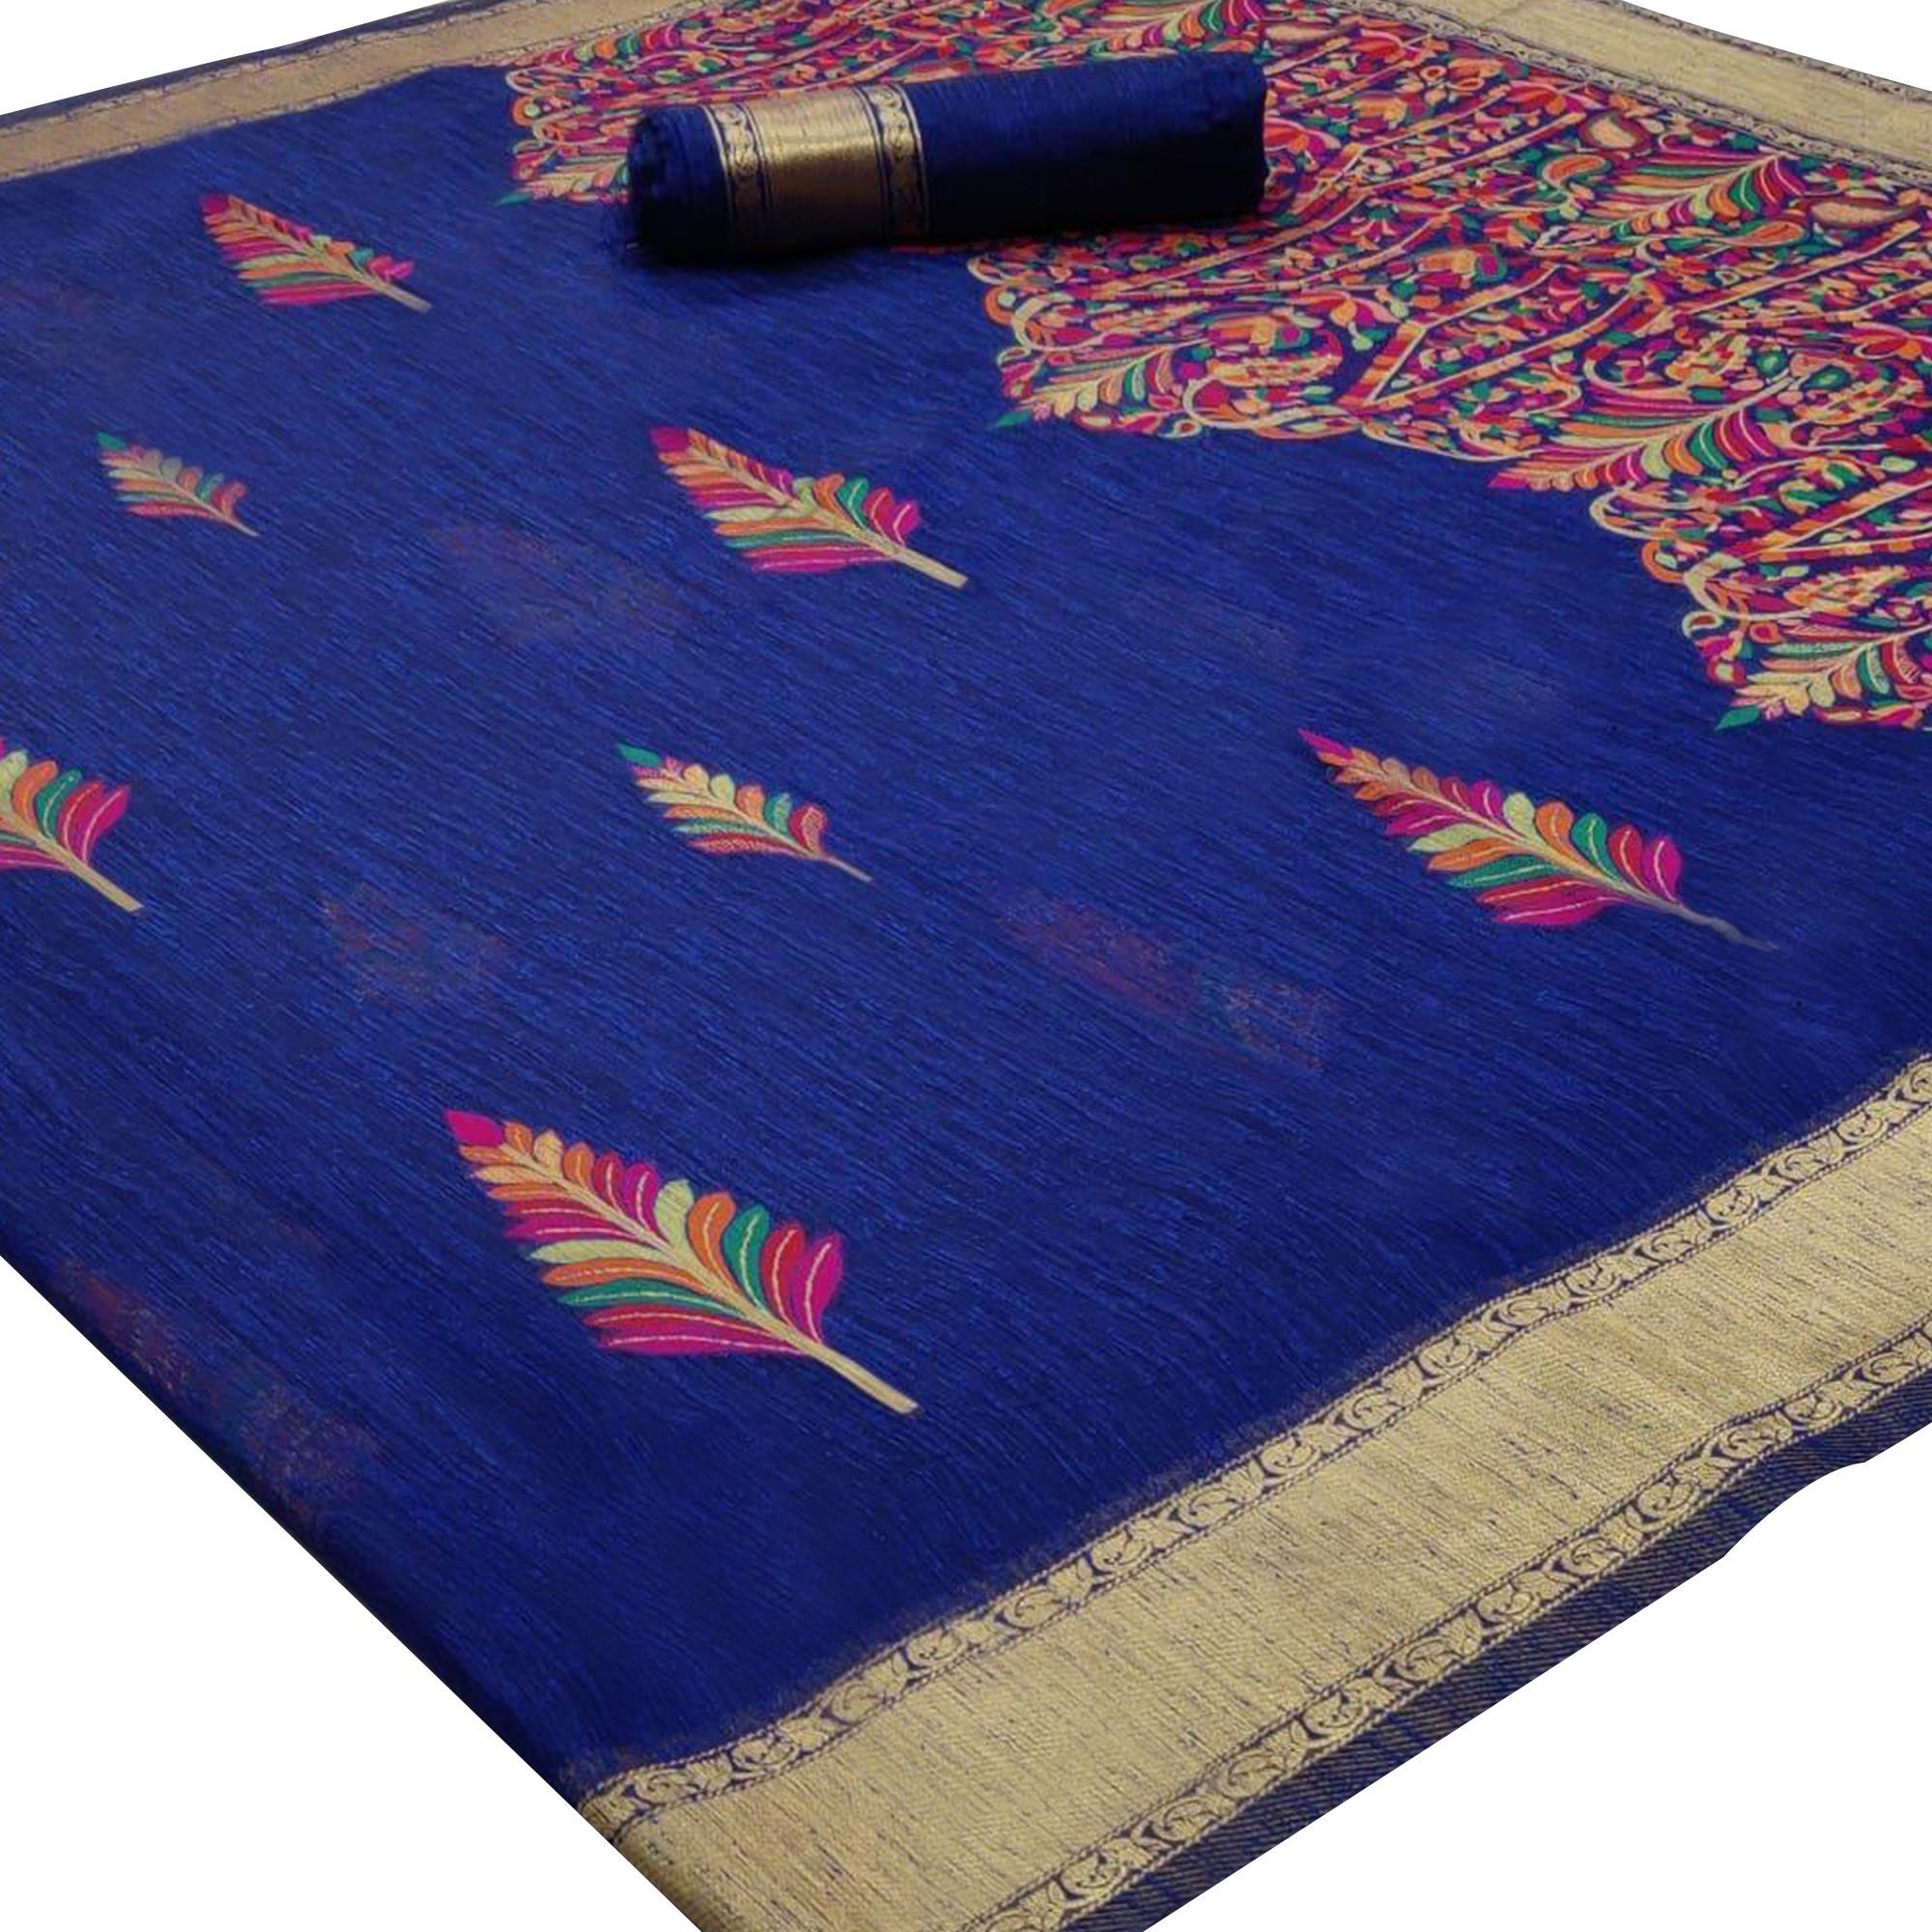 Glowing Blue Colored Partywear Printed Linen Saree - Peachmode